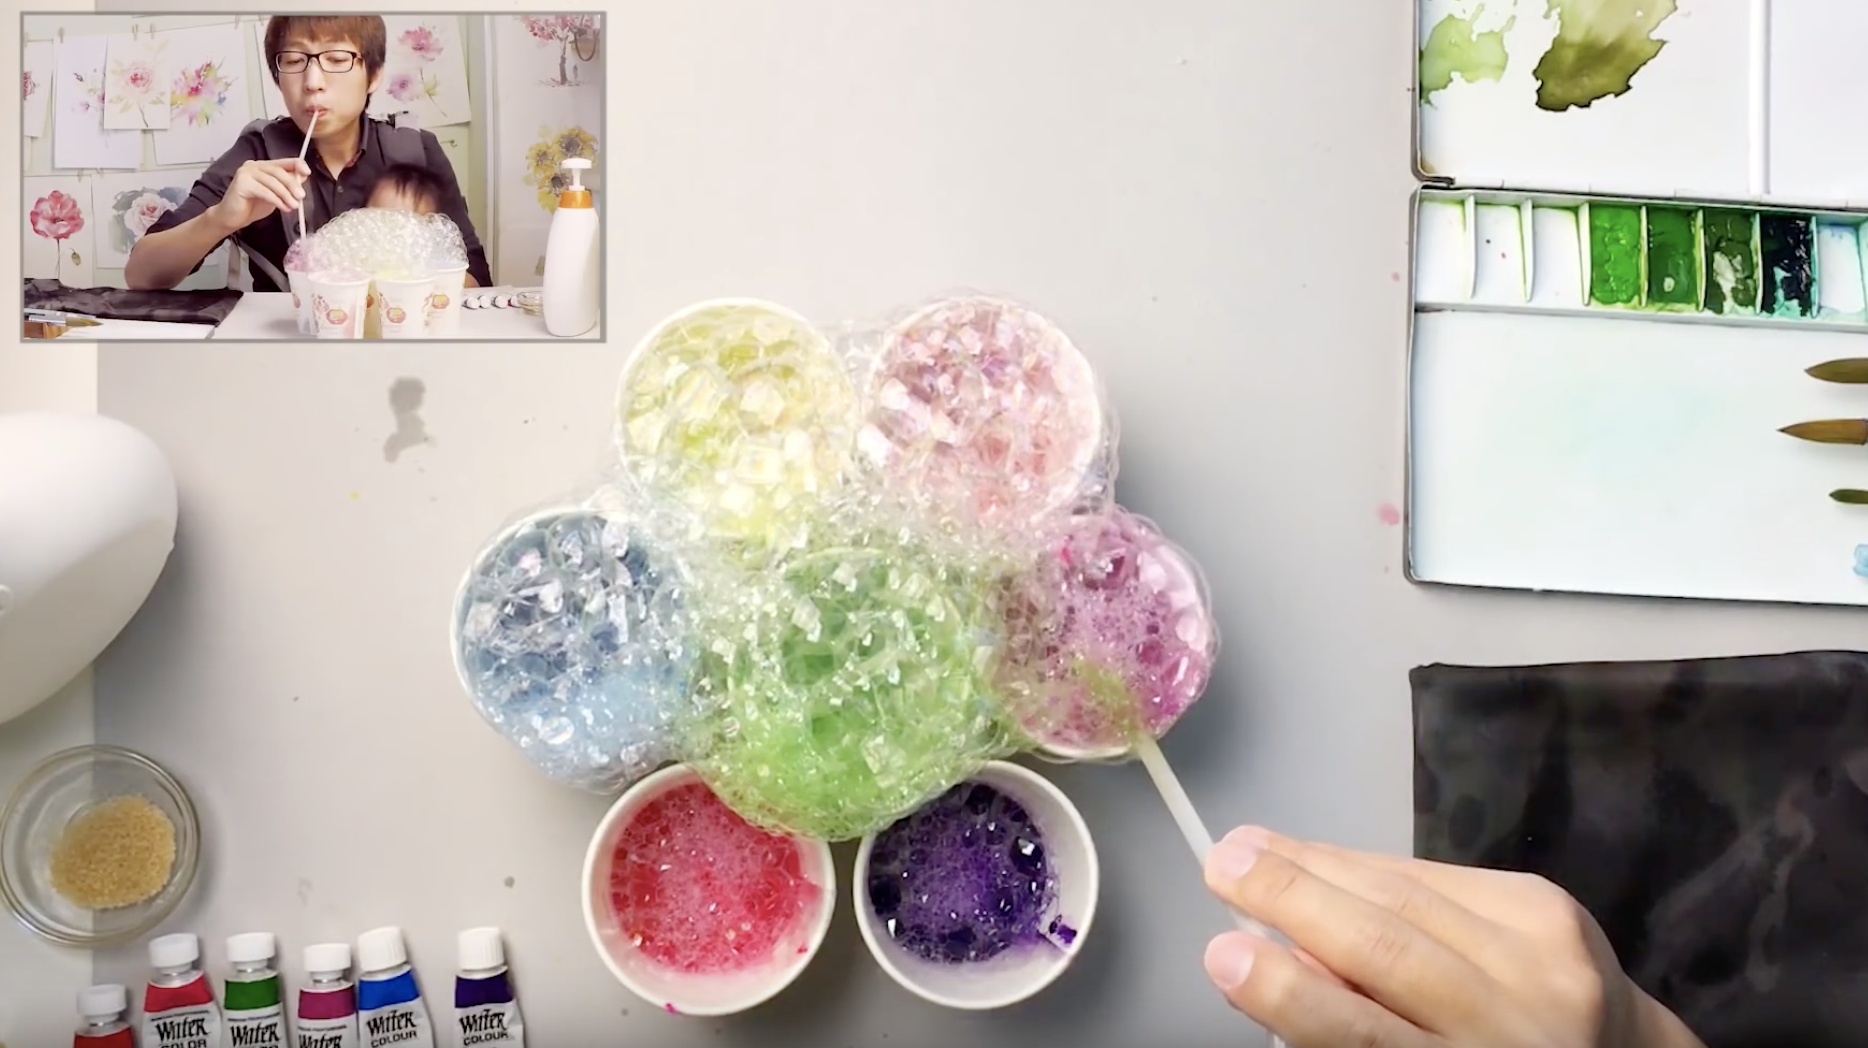 bubbles-easy-painting-ideas-using-watercolor-paint-for-a-bubbly-texture-introduction2-step 4